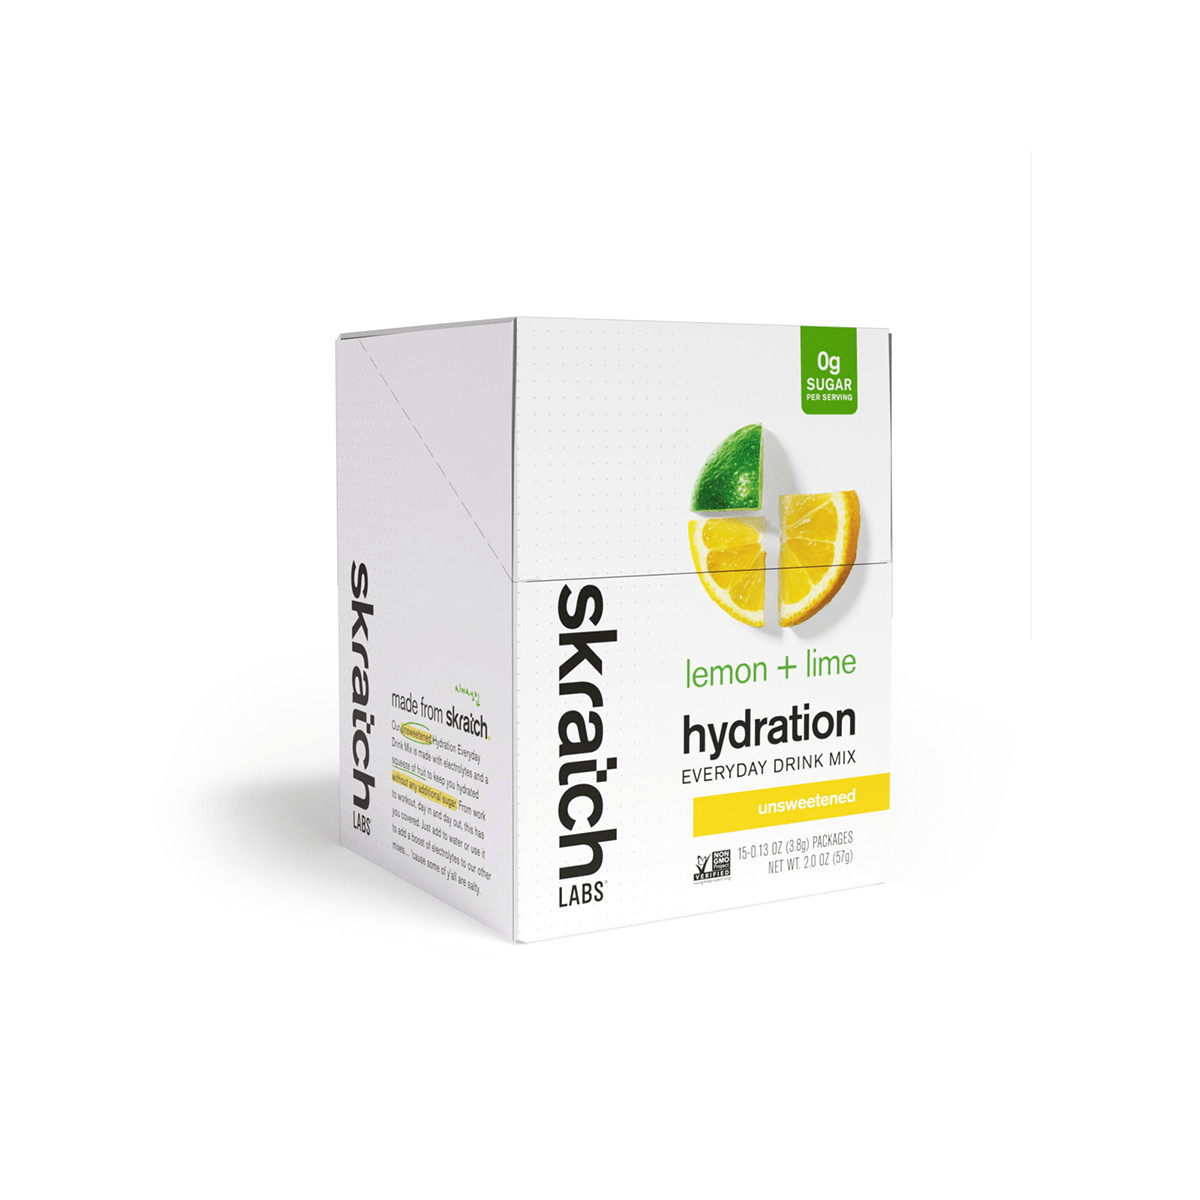 Skratch Labs Hydration Everyday Drink Mix 15pk Lemon & Lime Other - Nutrition - Drink Mixes